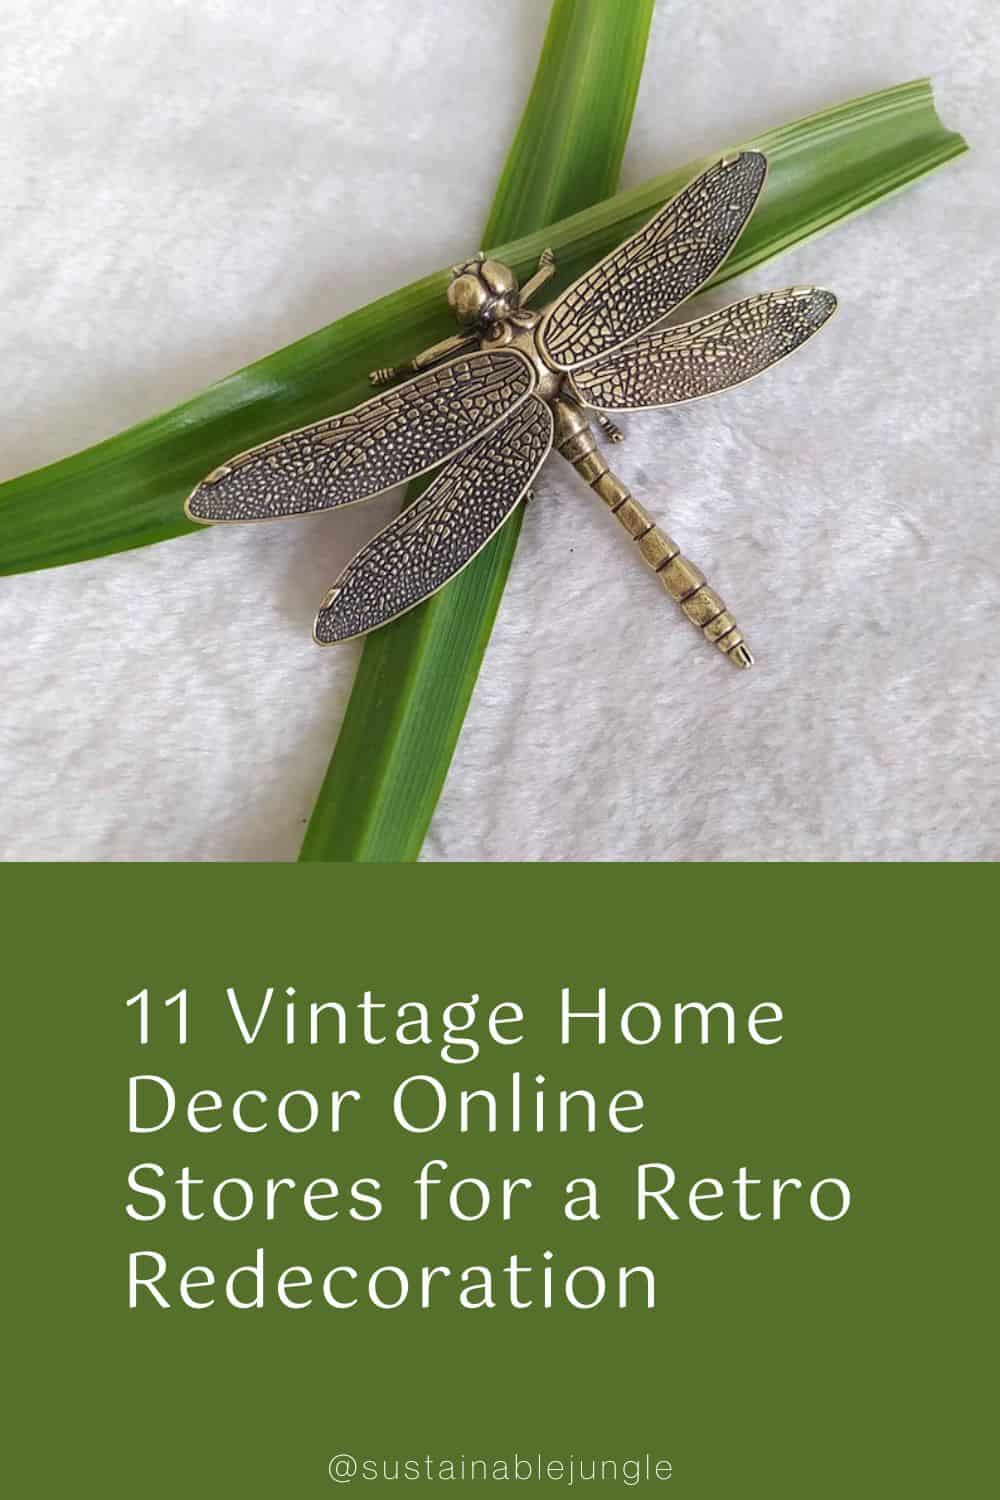 11 Vintage Home Decor Online Stores for a Retro Redecoration Image by Lichangmei #vintagehomedecor #vintagehomedecoronlinestores #vintagehomedecorshops #vintagehousedecor #retrohomedecor #retrohomedecorideas #sustainablejungle